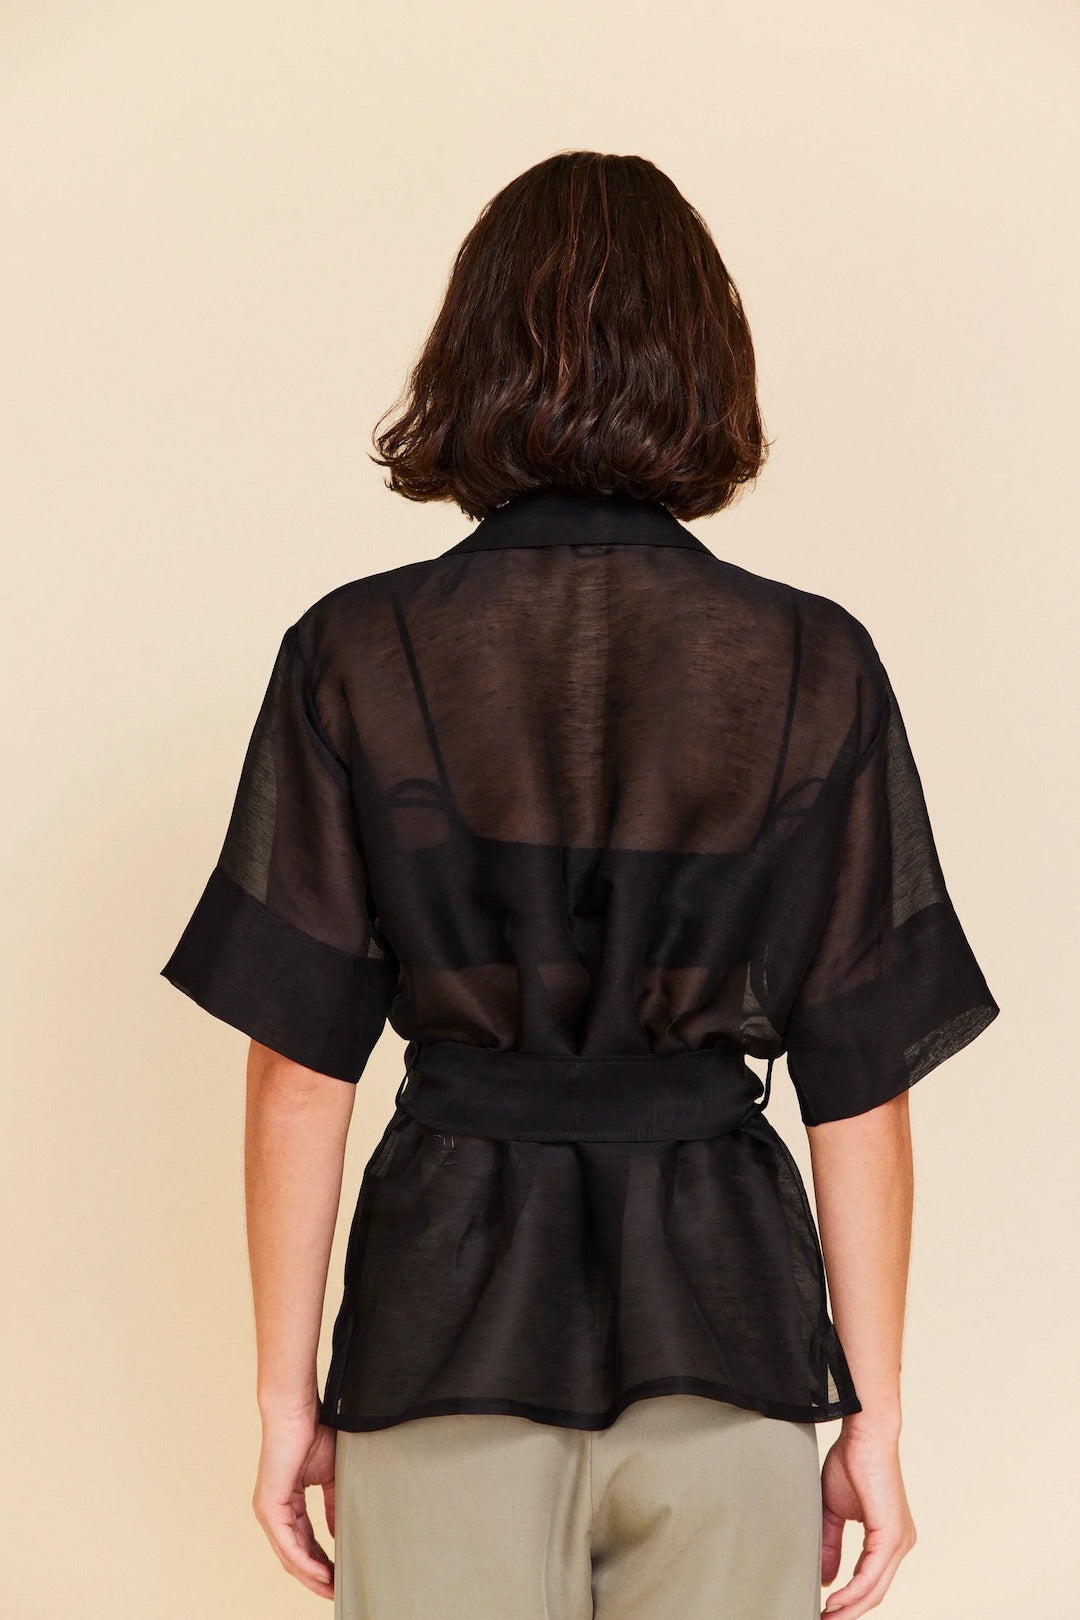 The back view of a woman wearing an OVNA OVICH Ora Shirt – Onyx and tan pants.